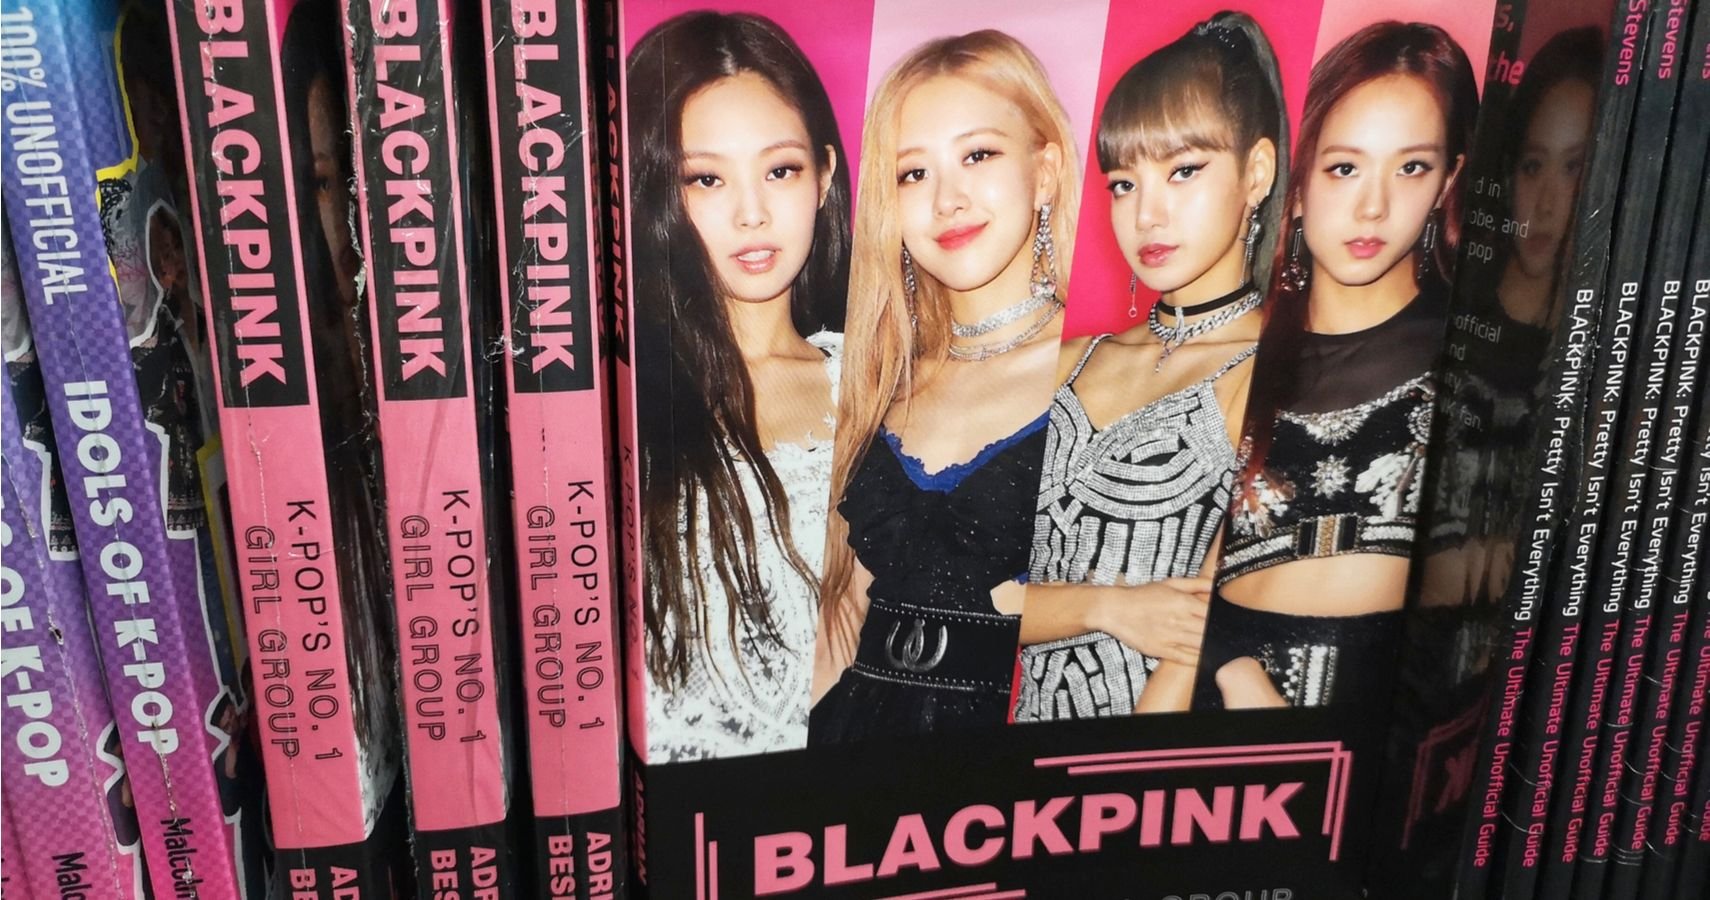 Kickin' It: How Blackpink Became The Most Subscribed Band On YouTube